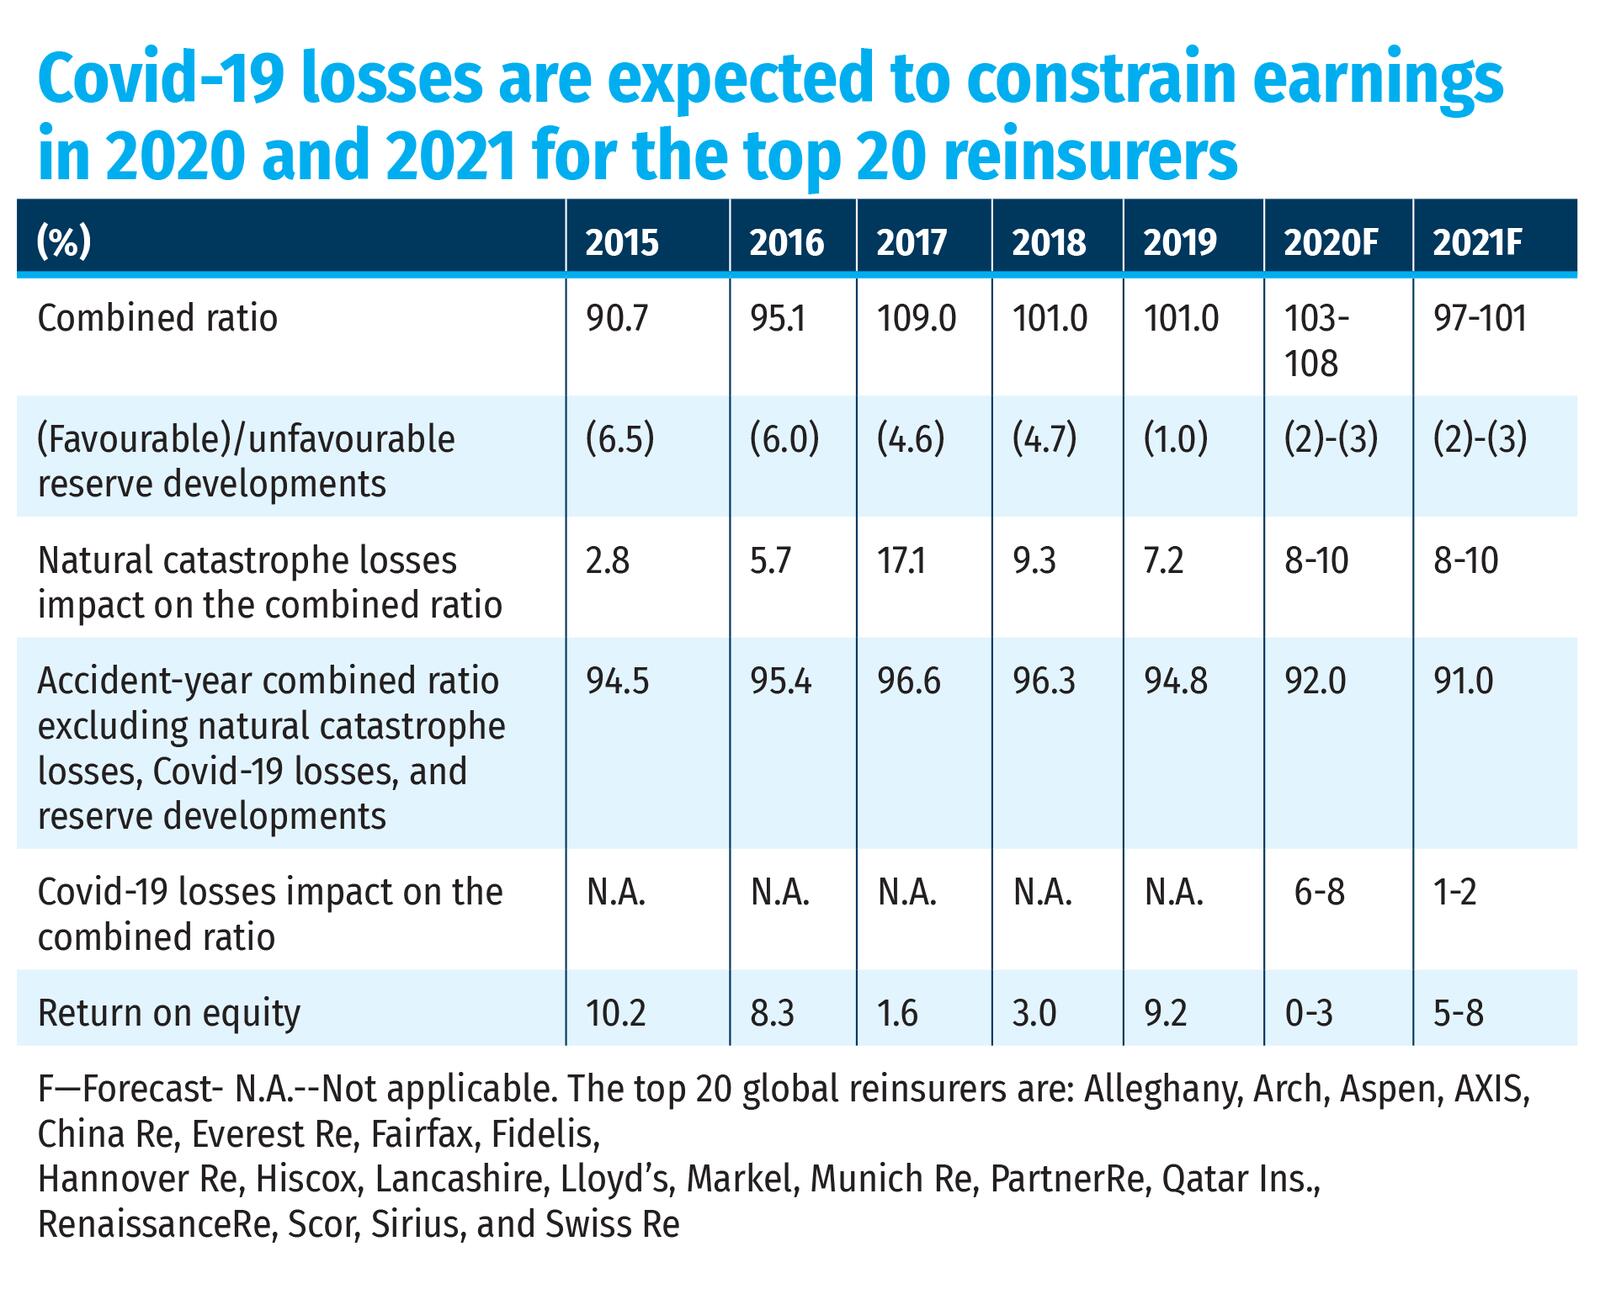 Covid-19 losses are expected to constrain earnings in 2020 and 2021 for the top 20 reinsurers 